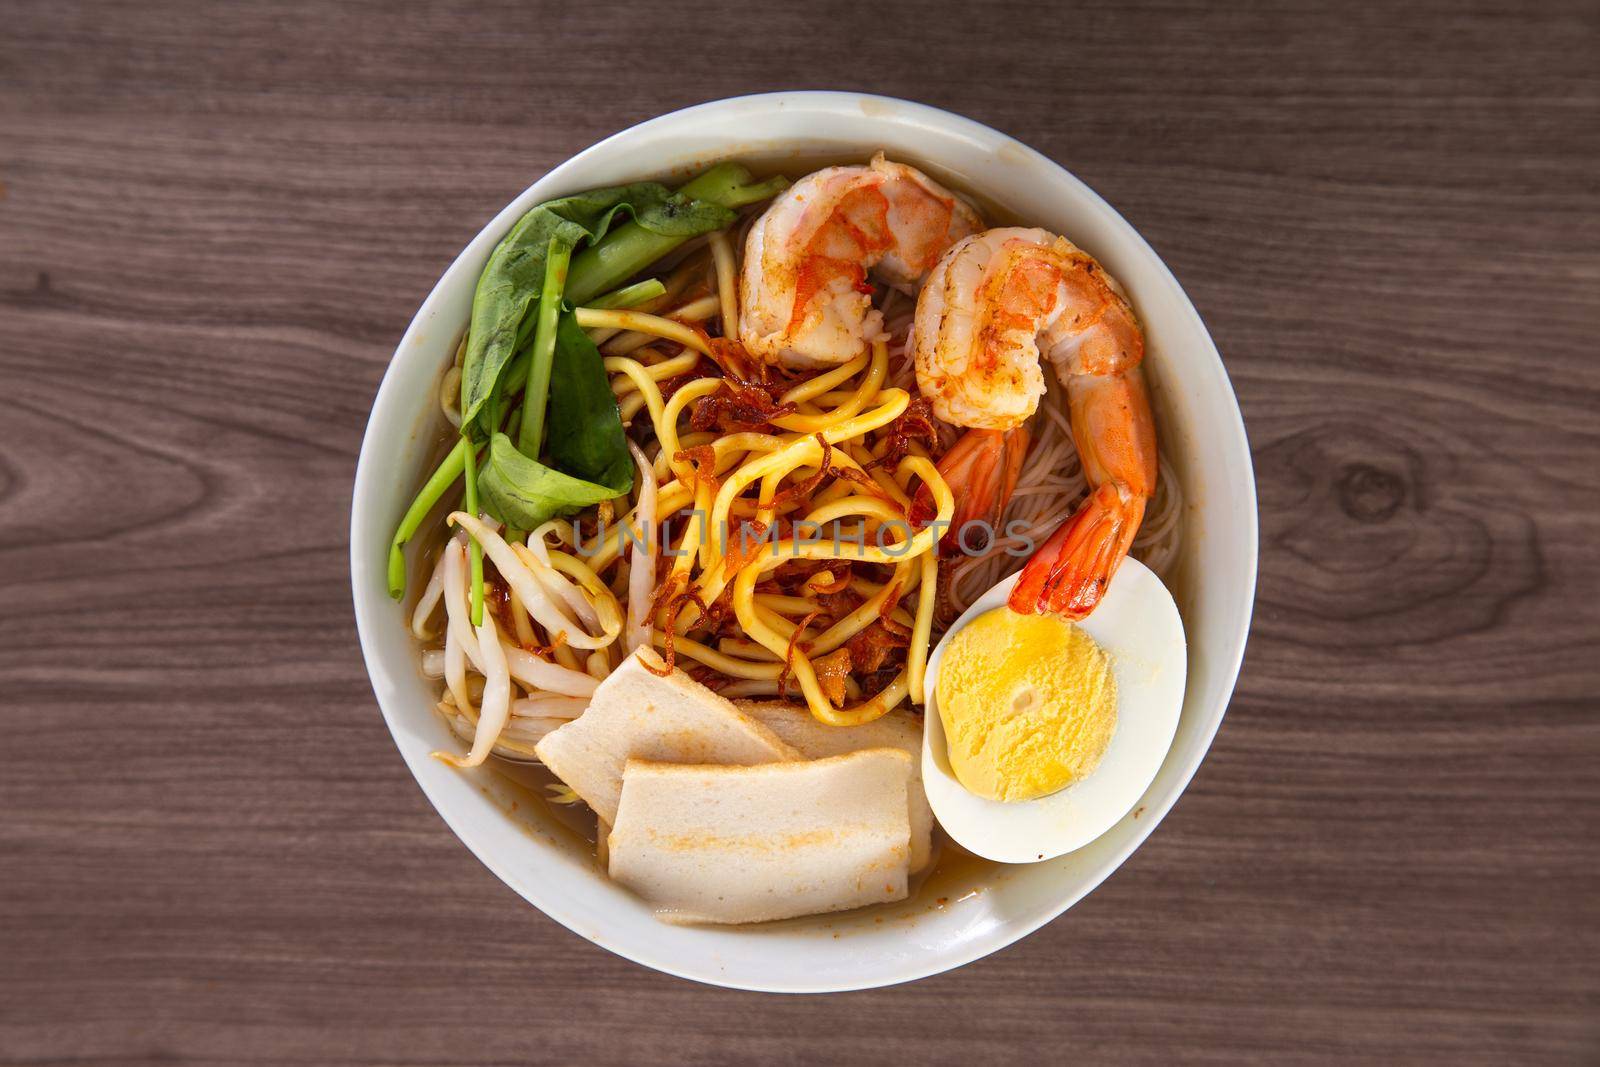 Spicy Prawn Noodle. A delicacy made popular by the Chinese in Malaysia and Singapore by tehcheesiong